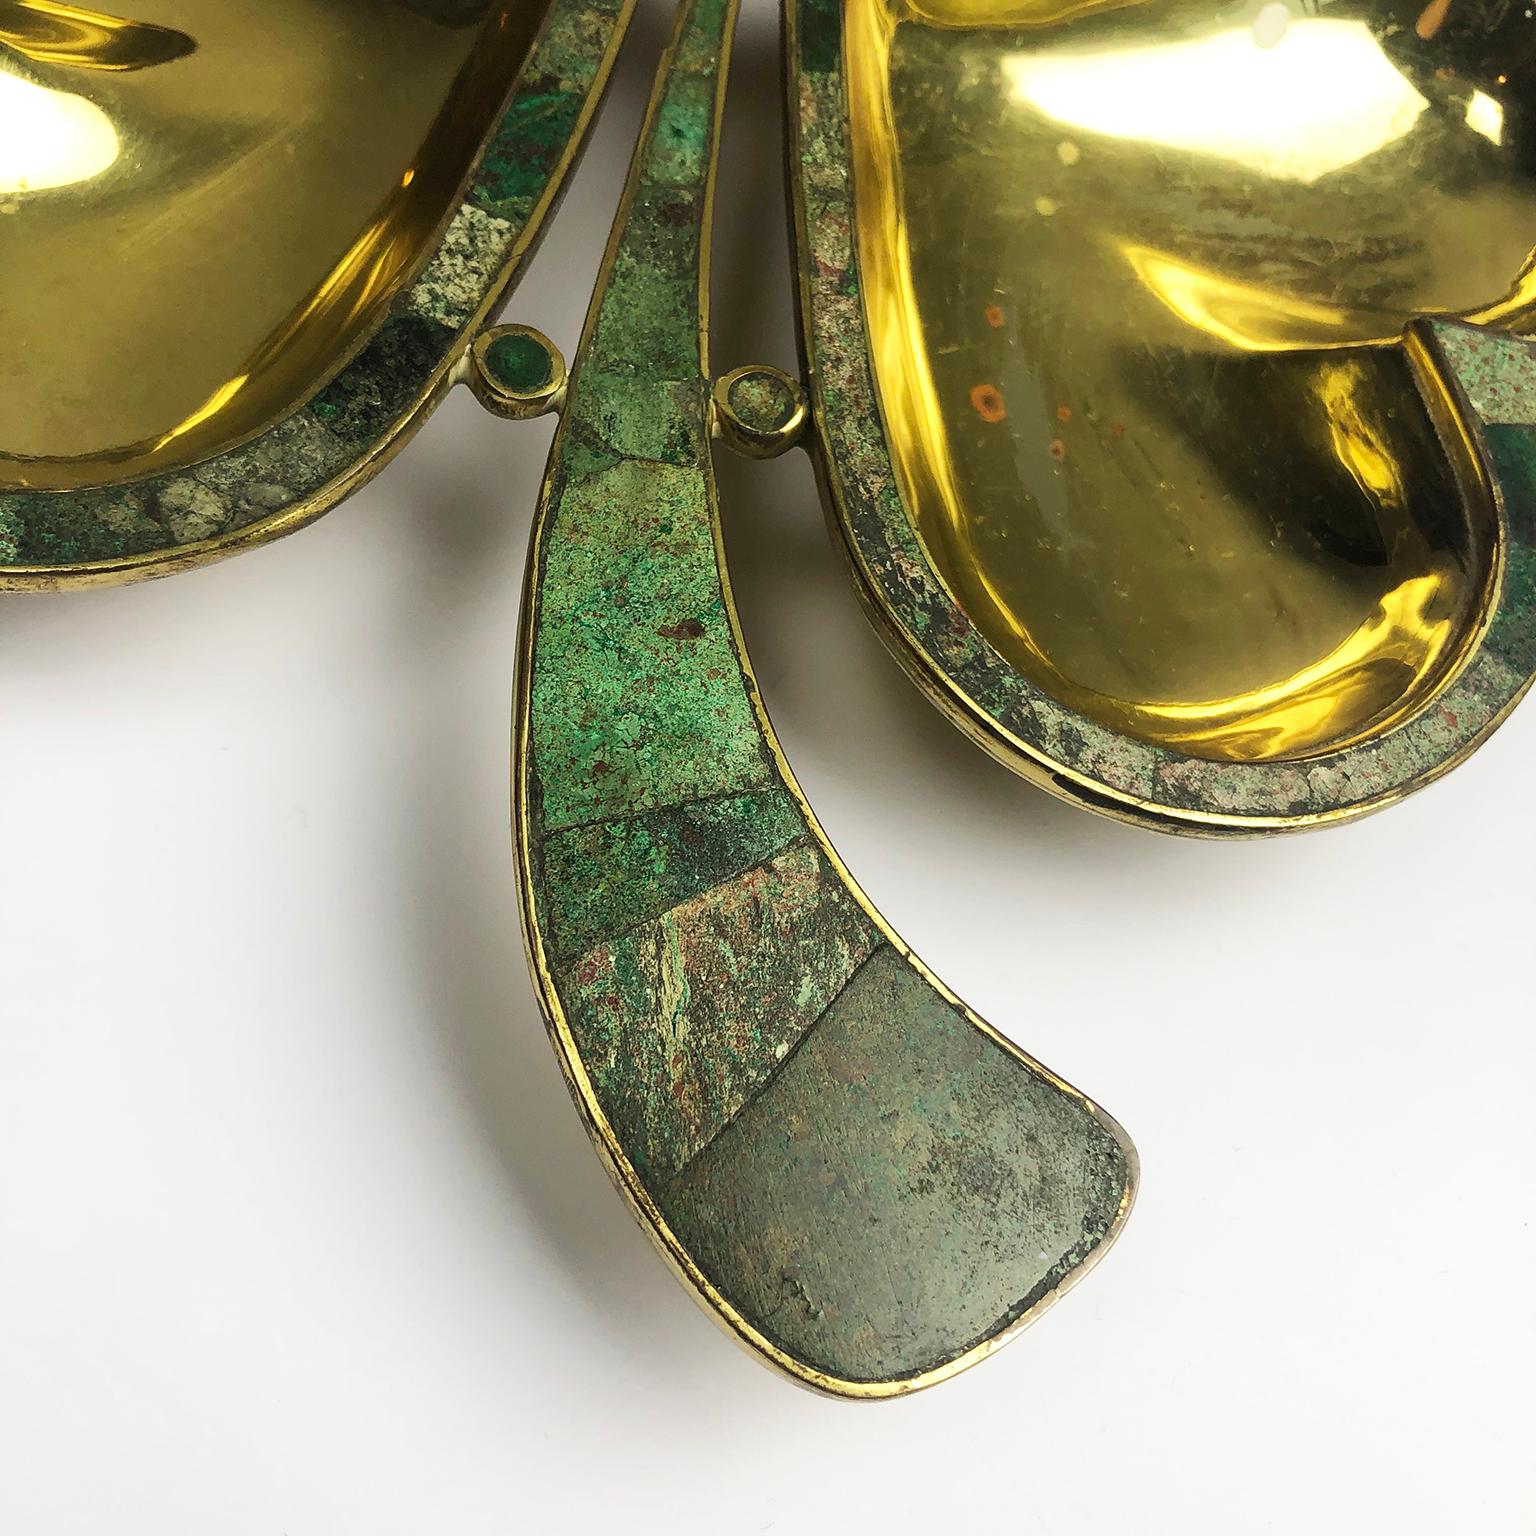 We offer this midcentury Mexican dish in clover form by Los Castillo in gold plated and stone inlay includes marked brand and serial number #248.